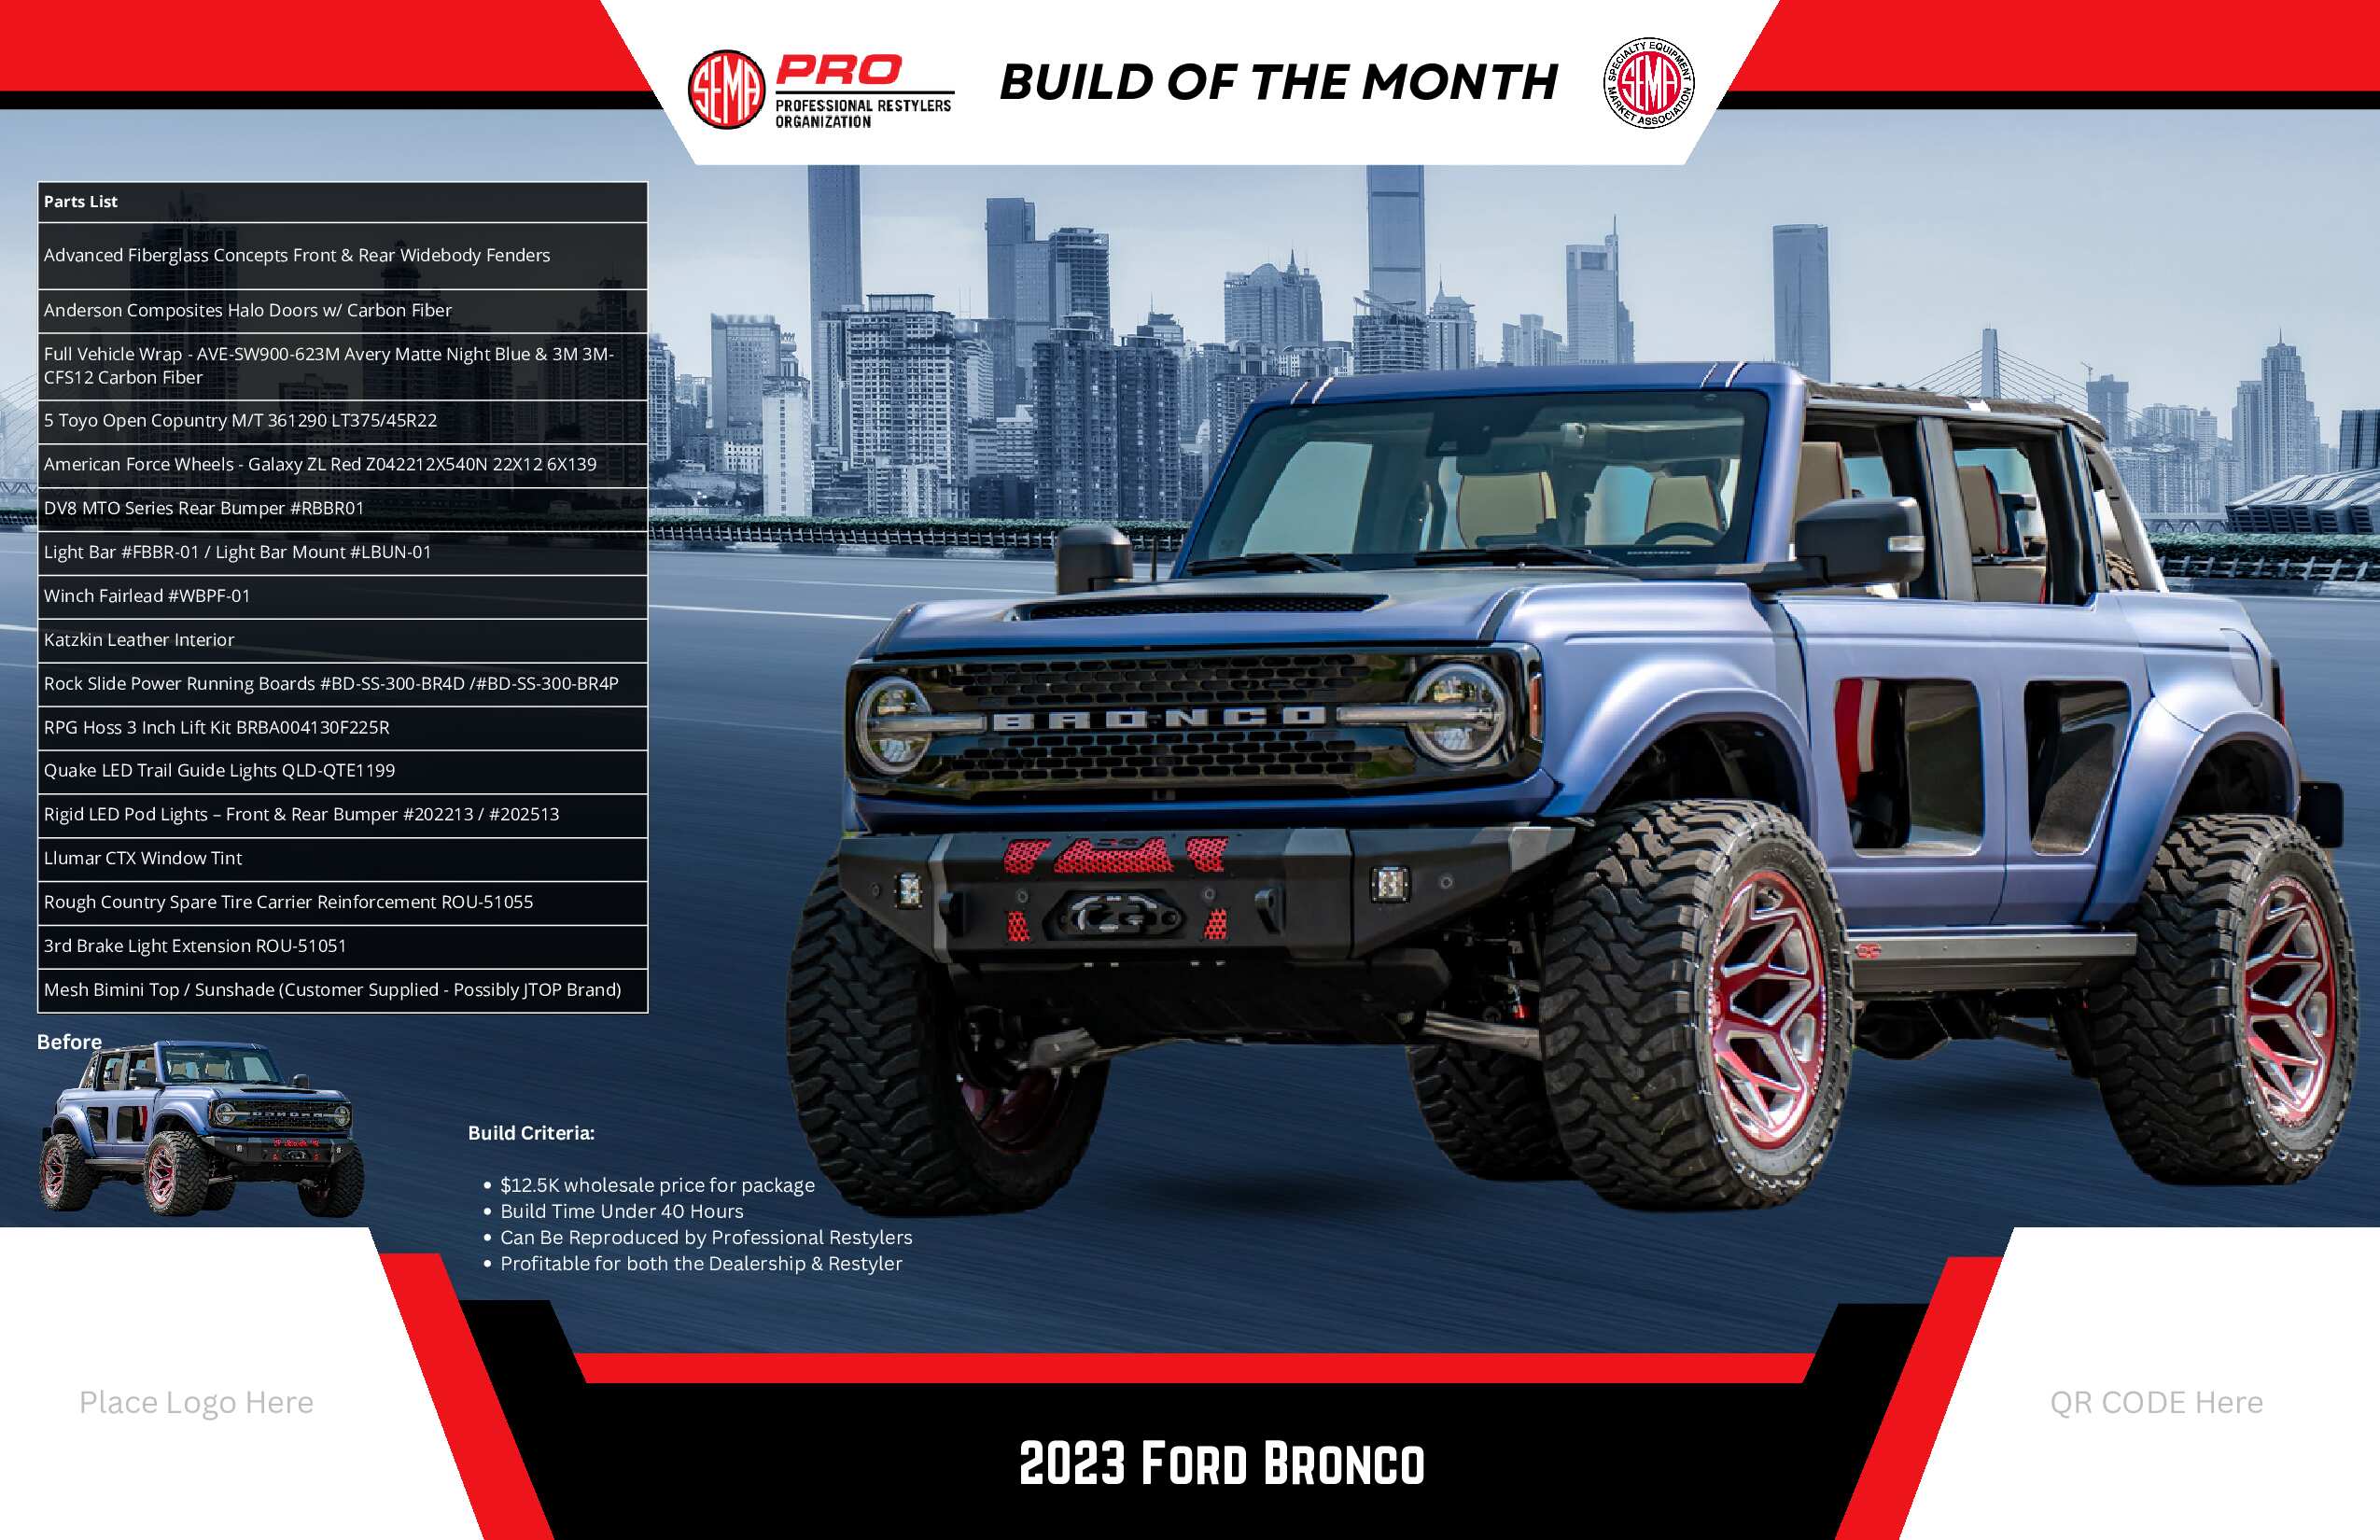 Get Inspired: Check Out PRO’s Build of the Month! 